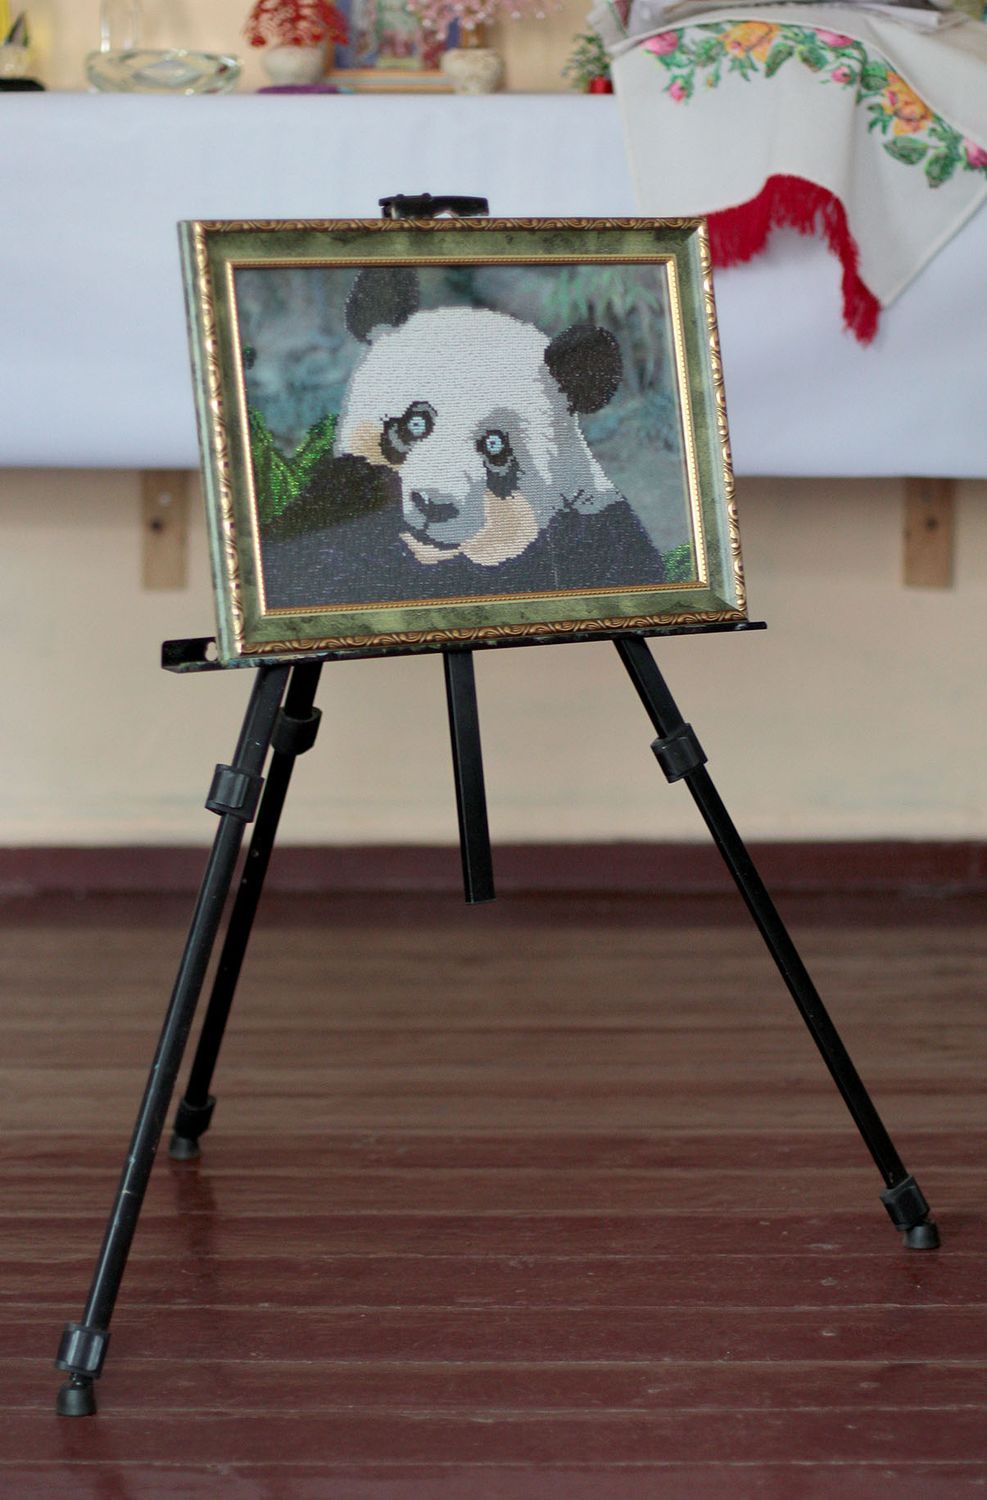 Picture for living room mosaic panda embroidered decoration nice present photo 5